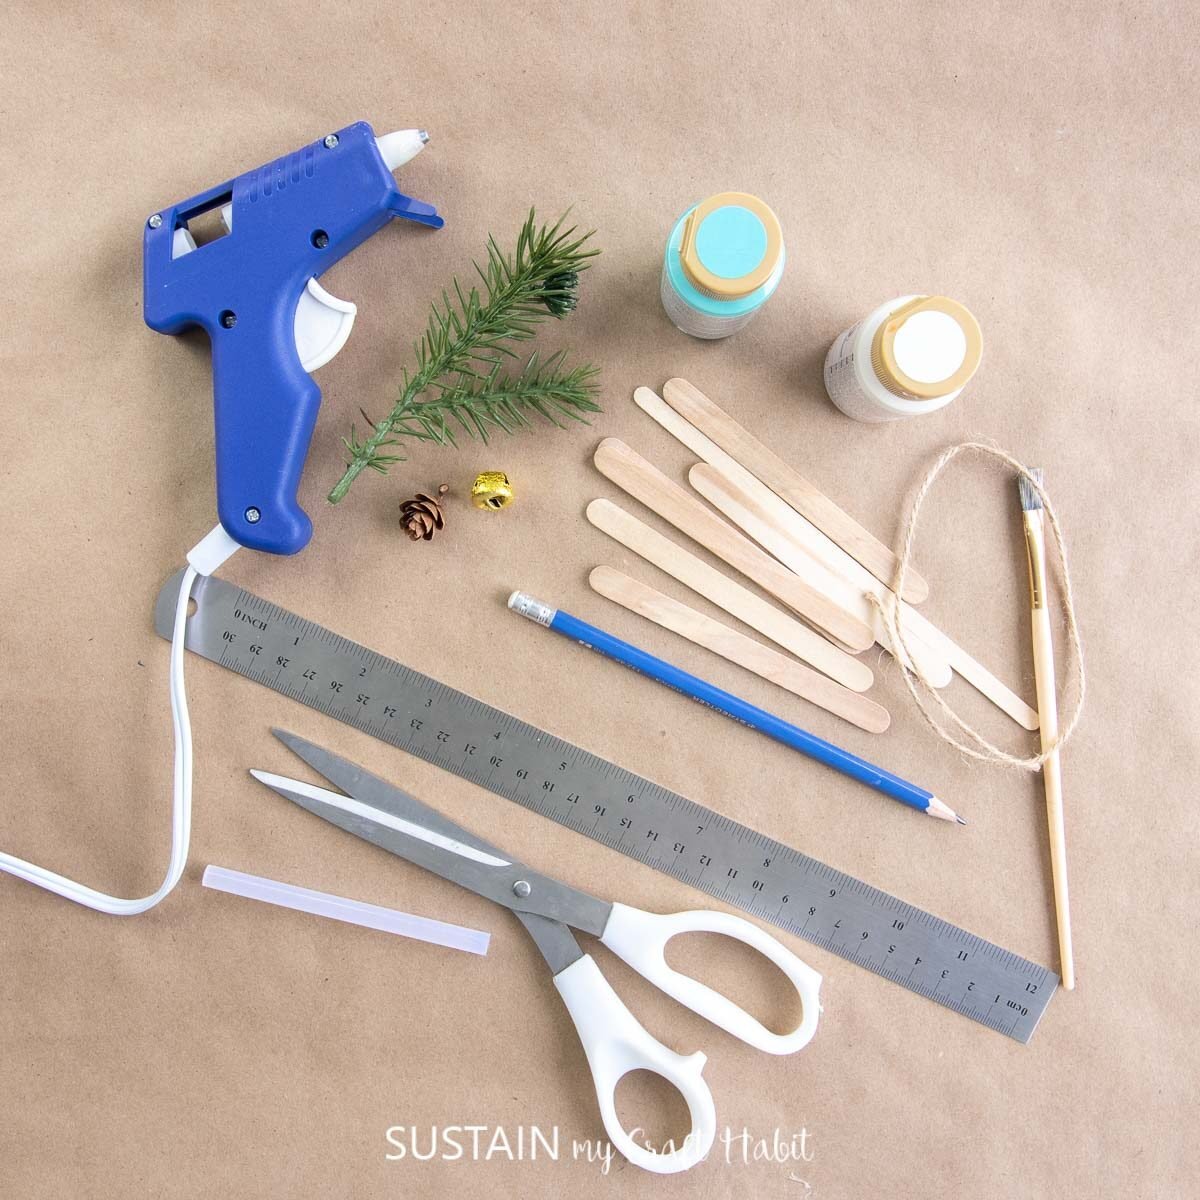 Materials needed to make a popsicle stick sled ornament including popsicle sticks, ruler, scissors, hot glue, paint and paint brush.